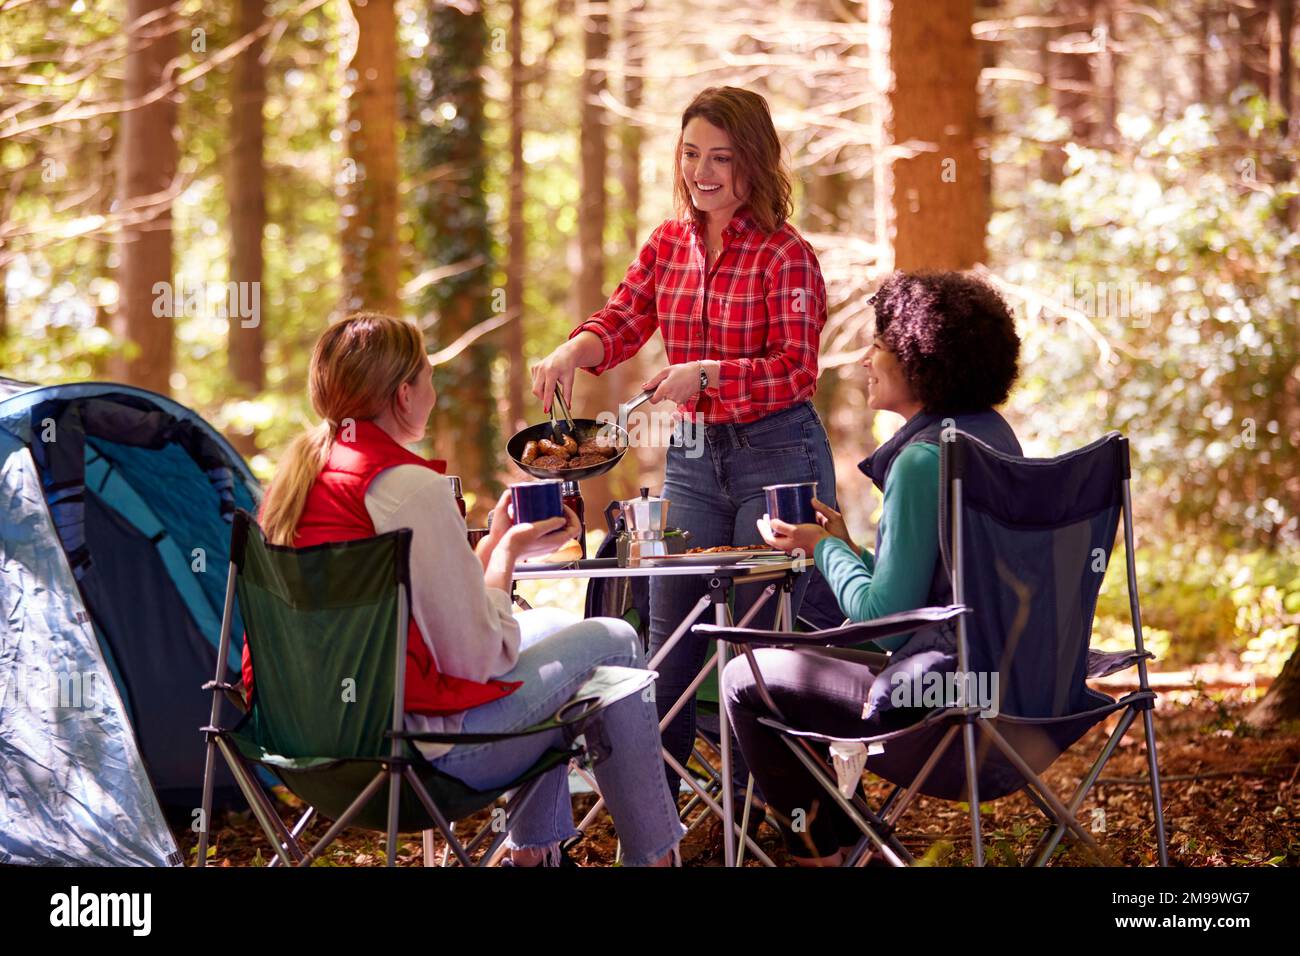 Group Of Female Friends On Camping Holiday In Forest Eating Meal Sitting By Tent Together Stock Photo